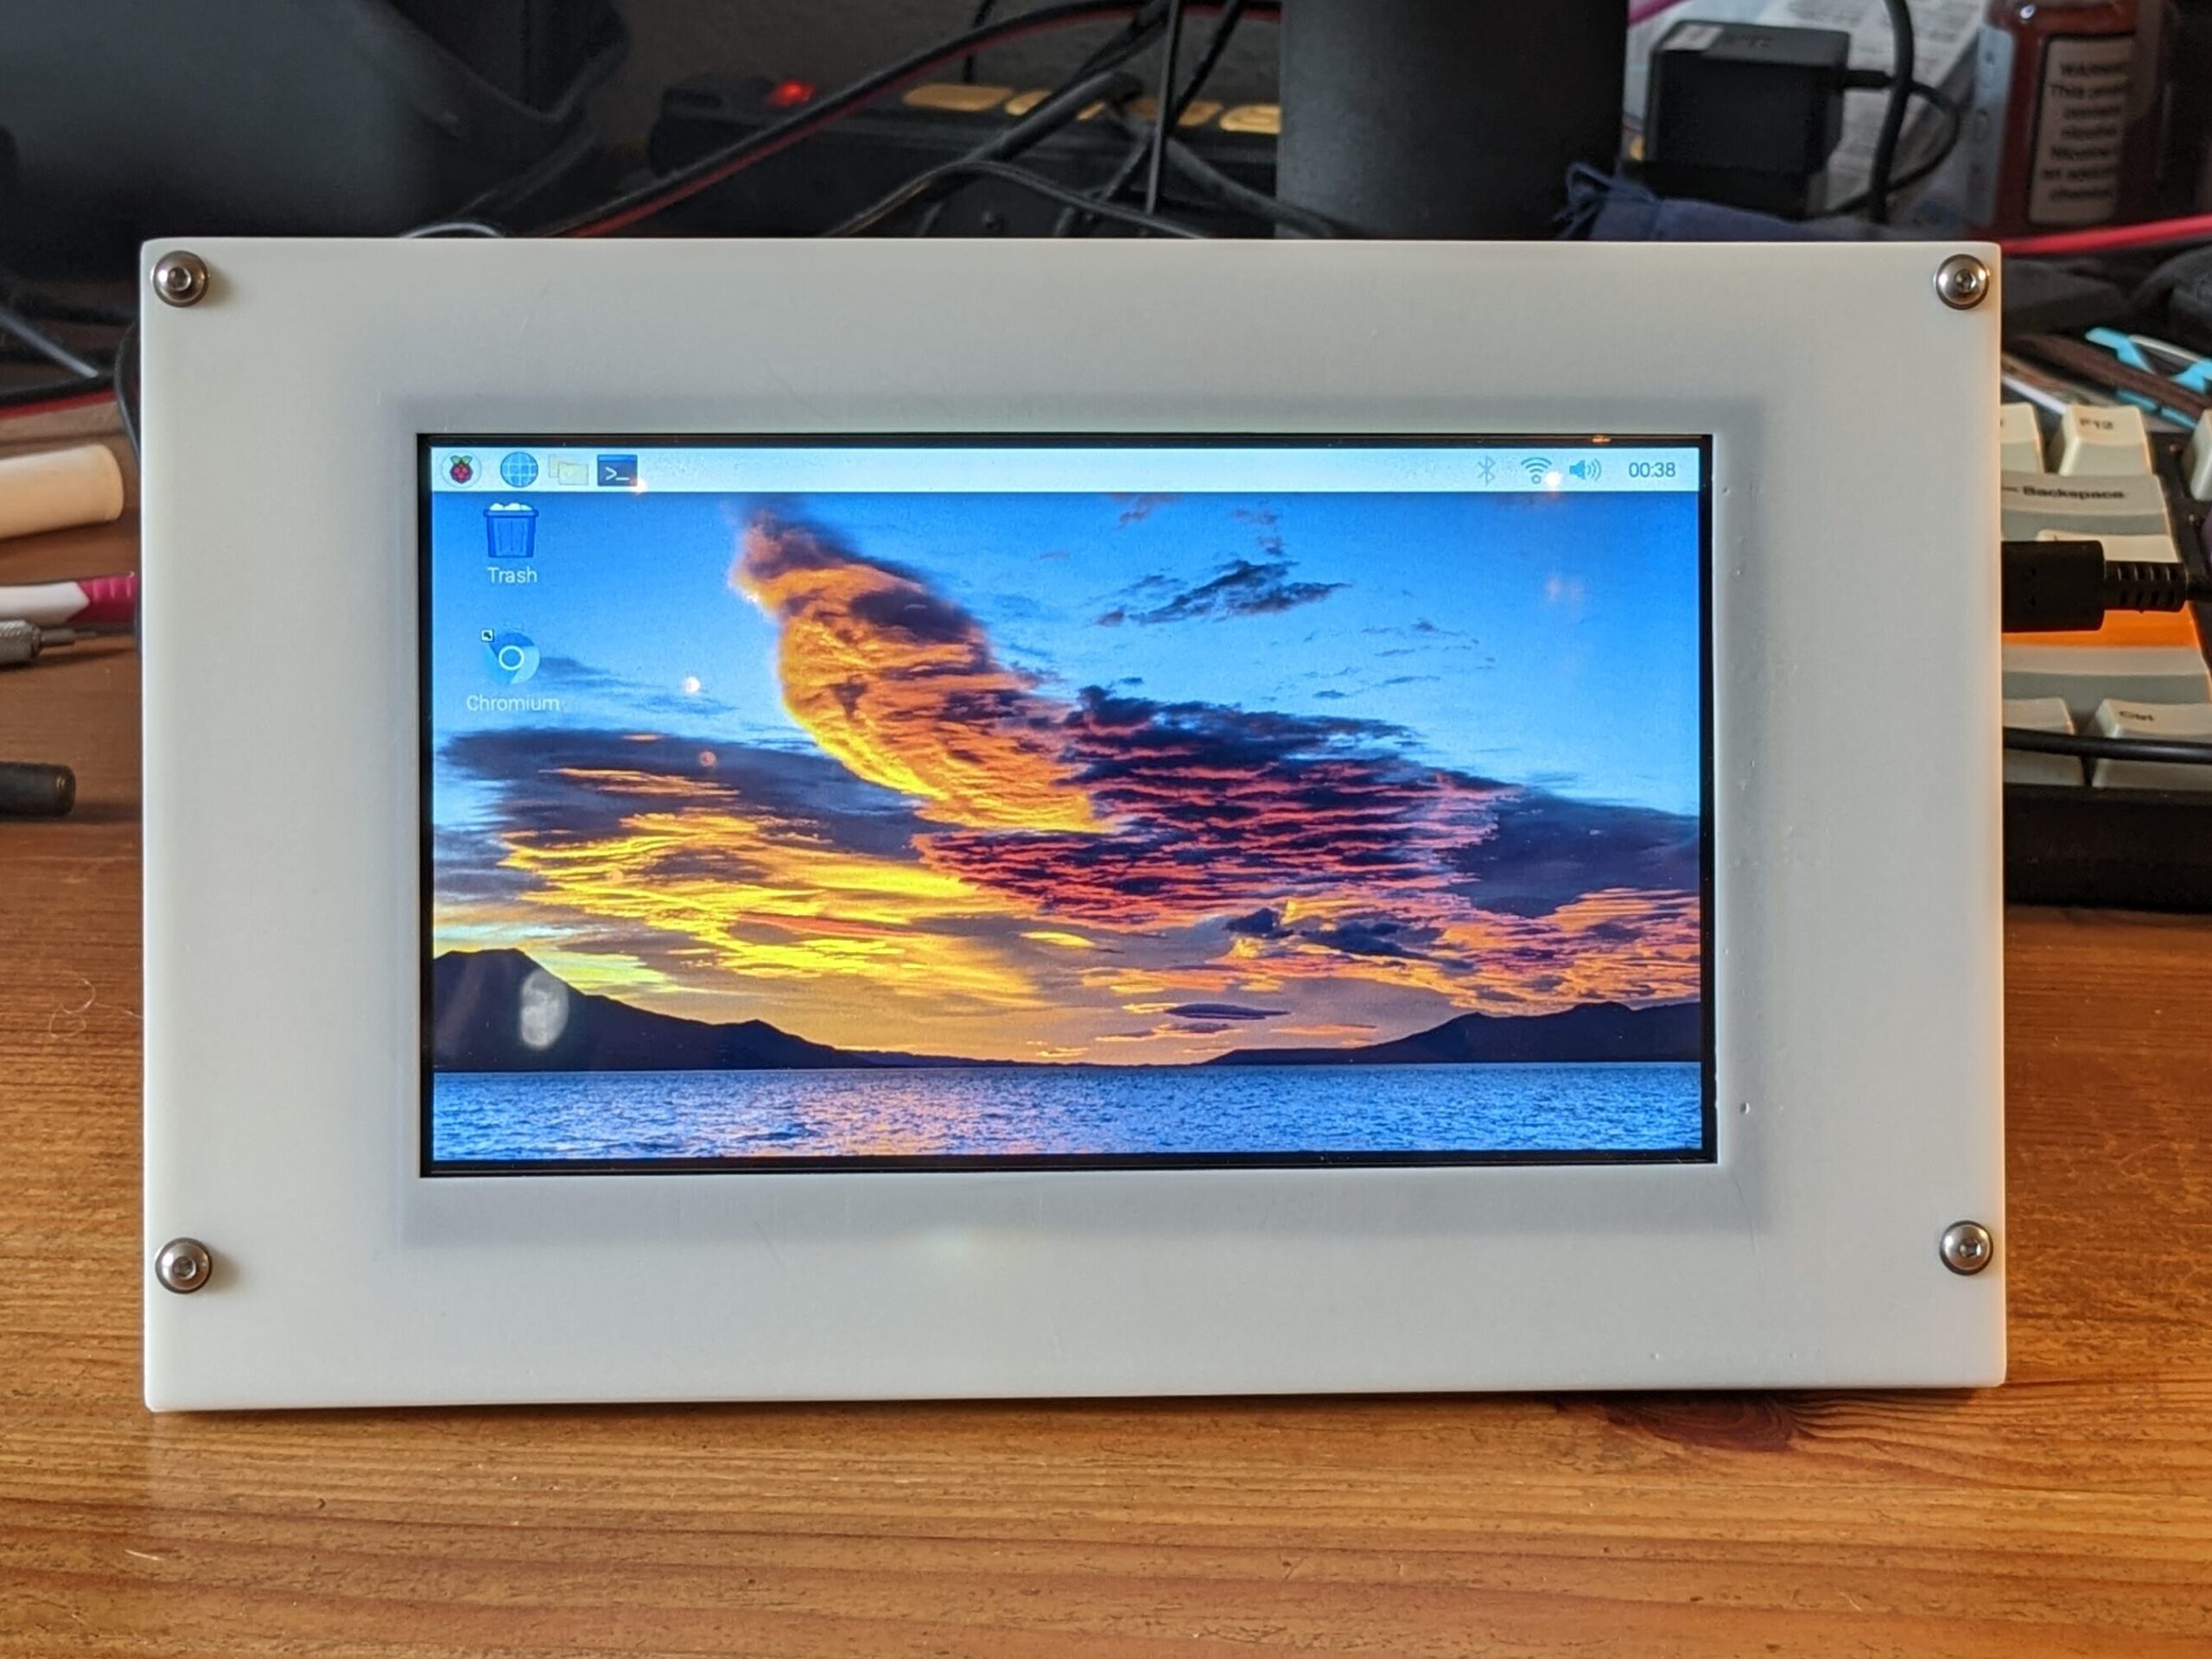 A Debian LXDE desktop live on the LCD screen in the sealed case